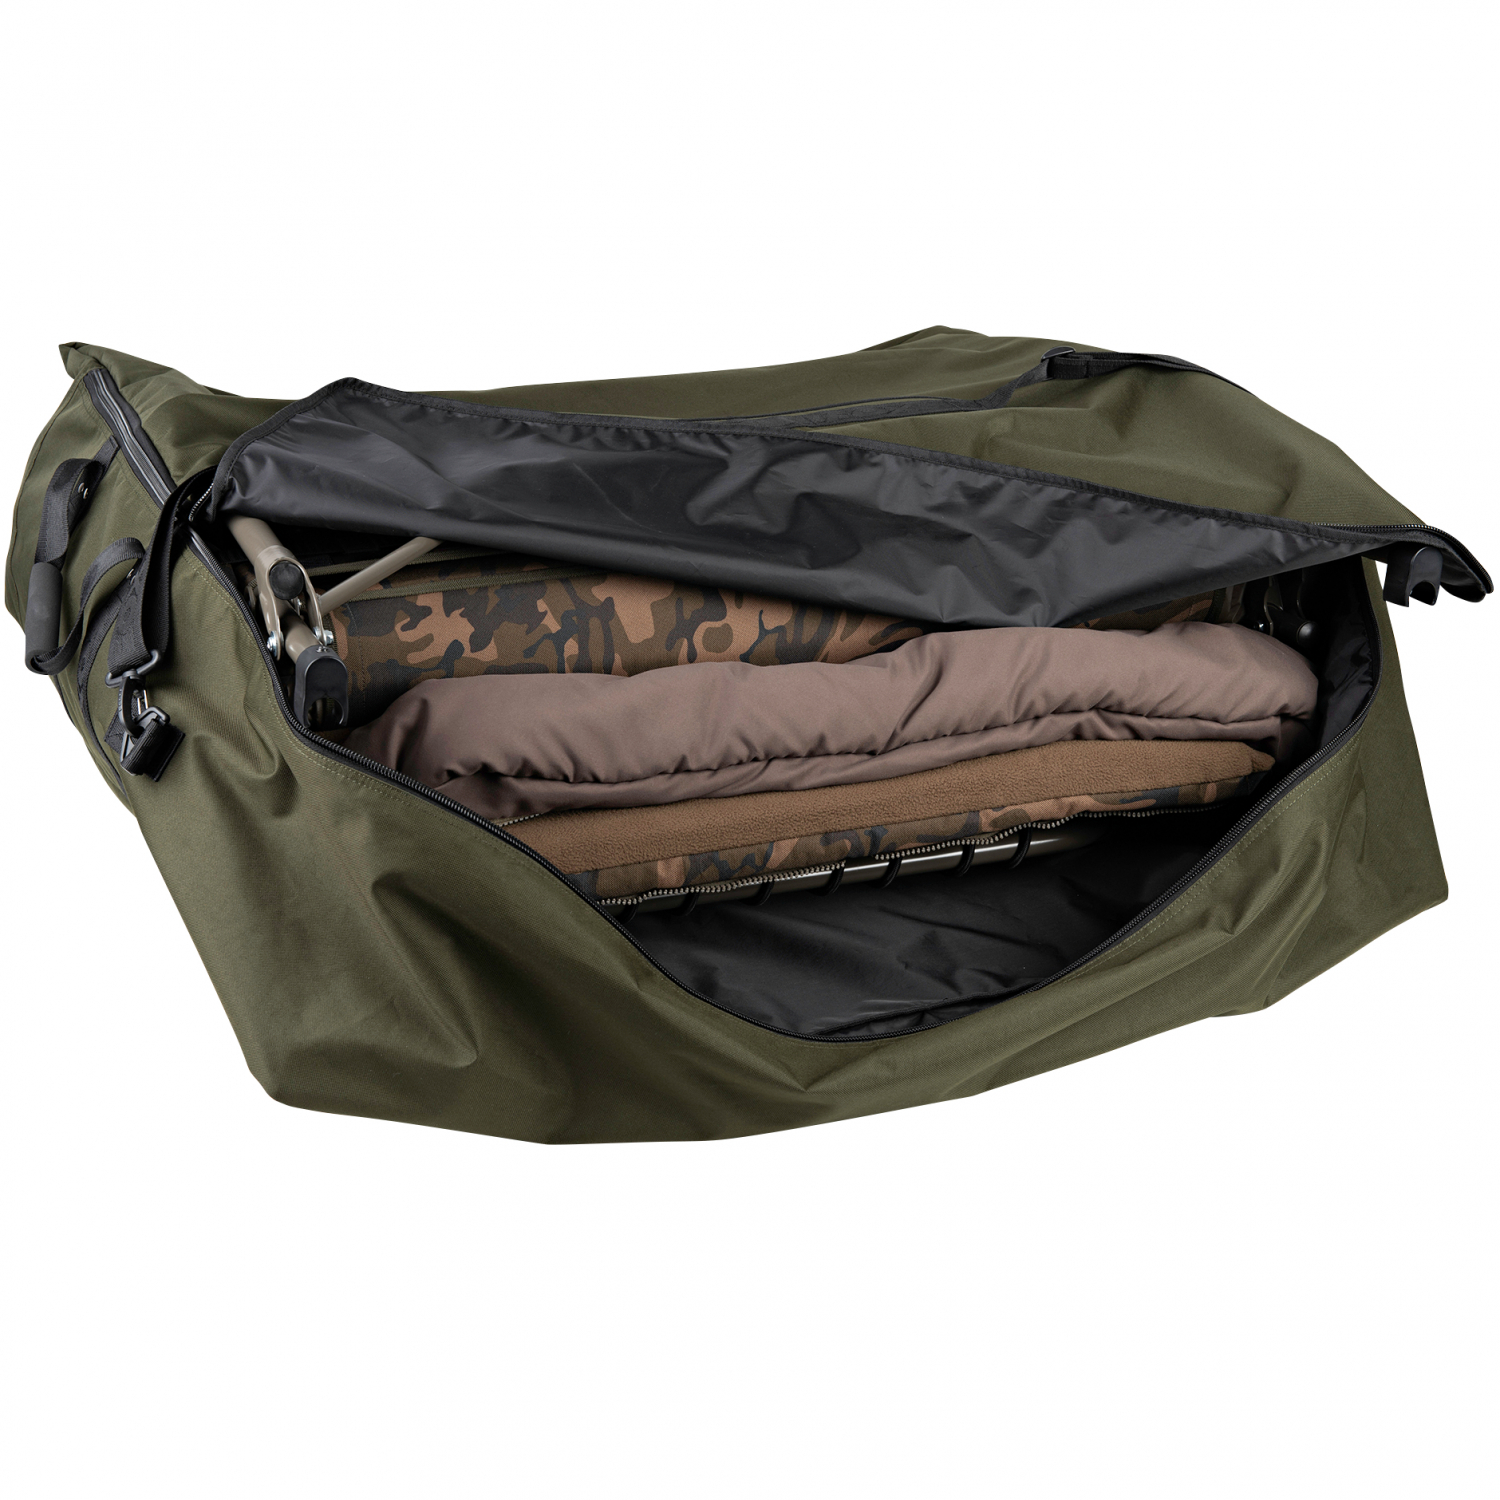 Fox Carp Bedchair Bag Large at low prices